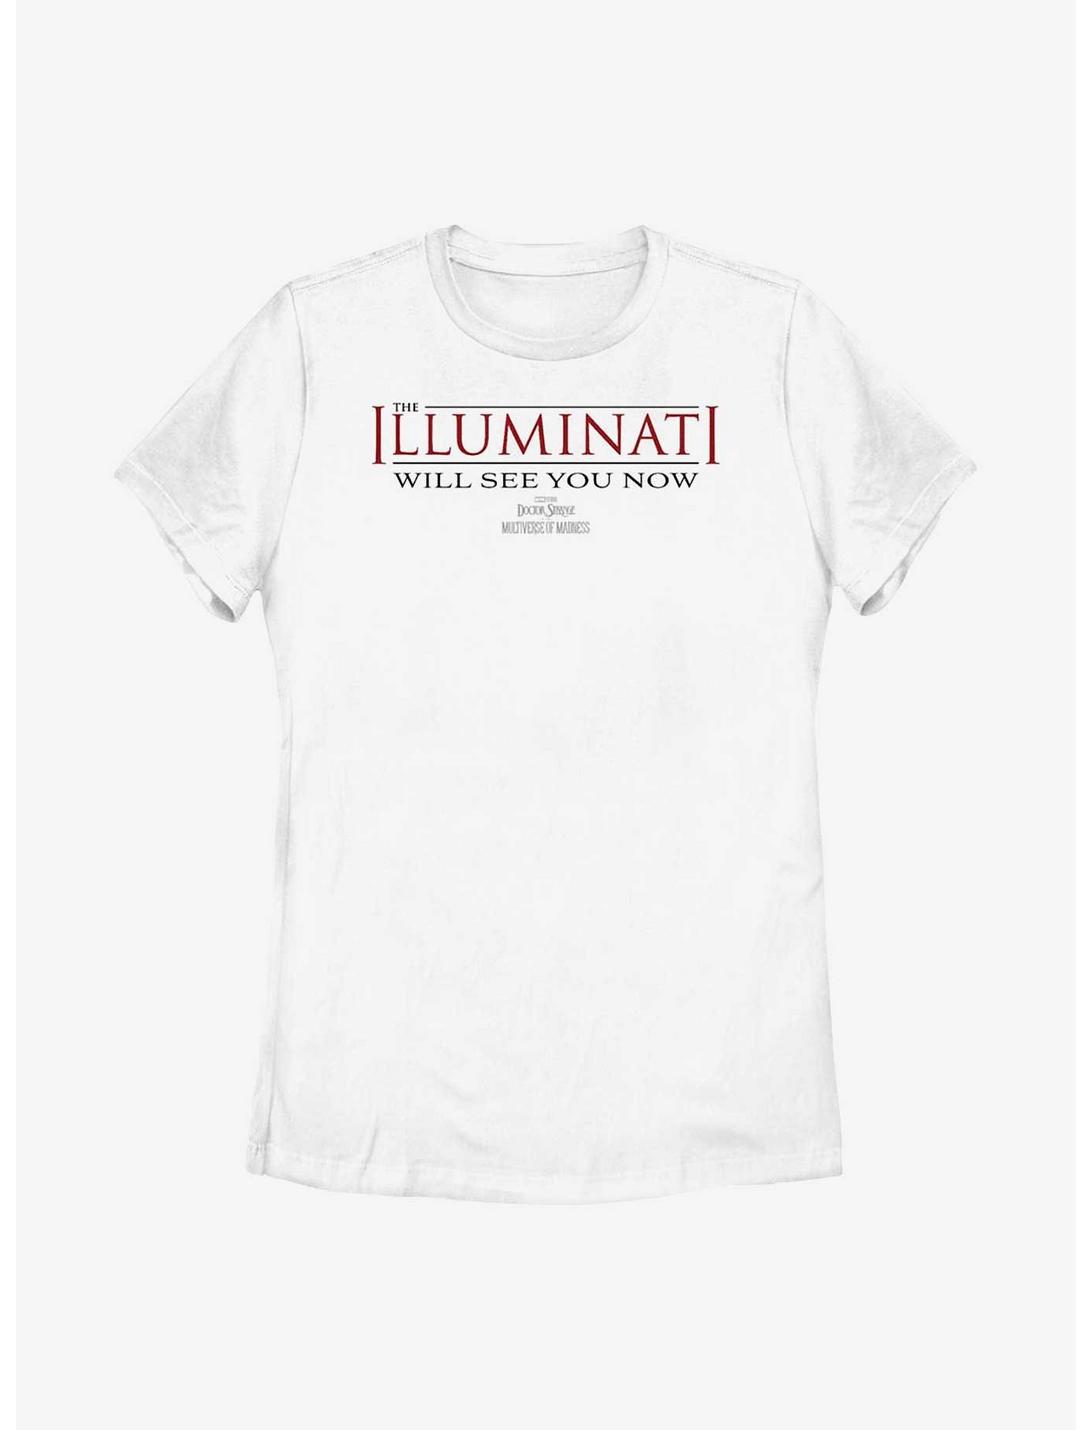 Marvel Doctor Strange In The Multiverse Of Madness The Illuminati Will See You Now Womens T-Shirt, WHITE, hi-res